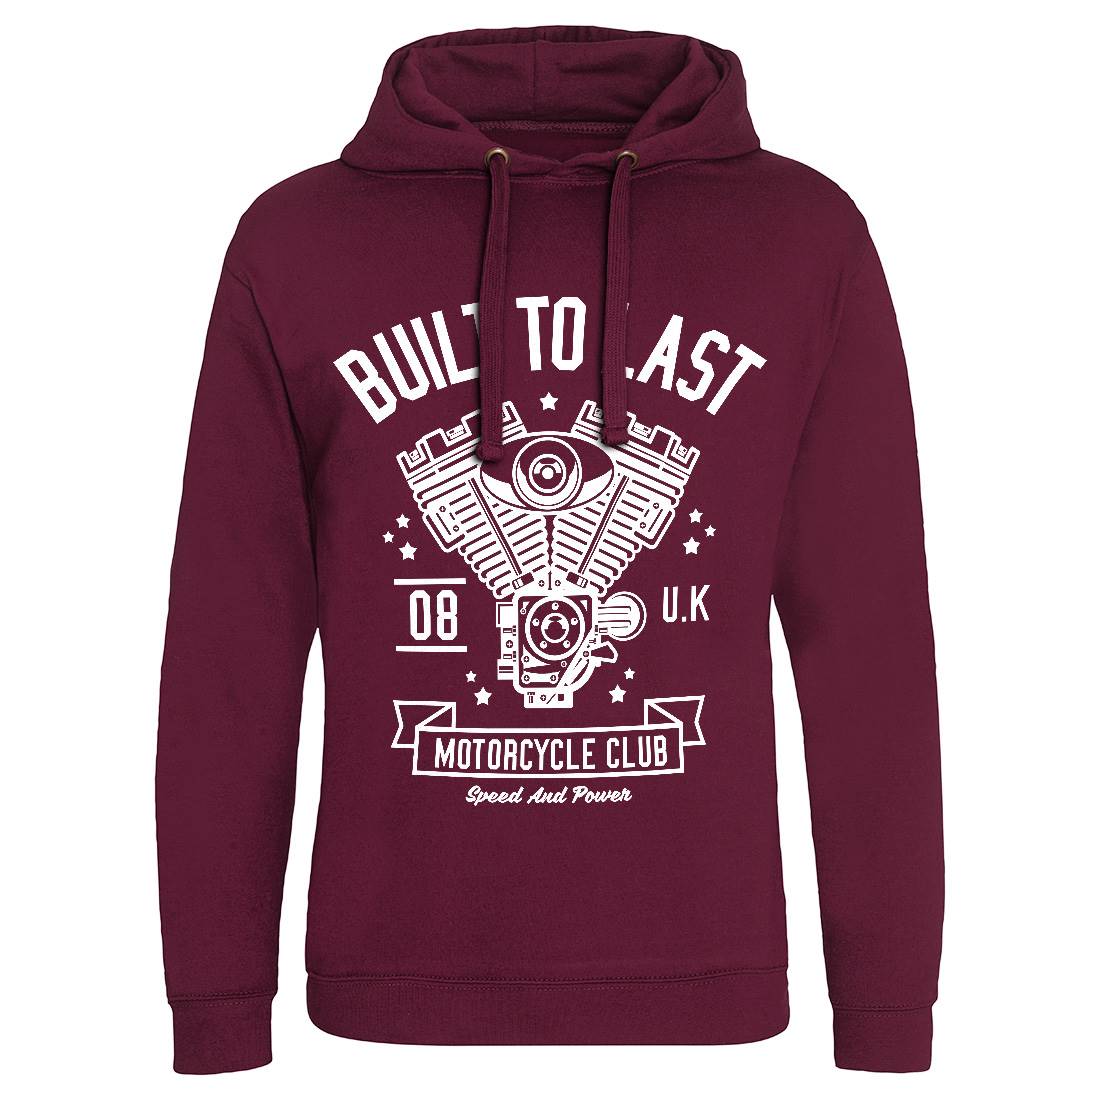 Built To Last Mens Hoodie Without Pocket Motorcycles A215